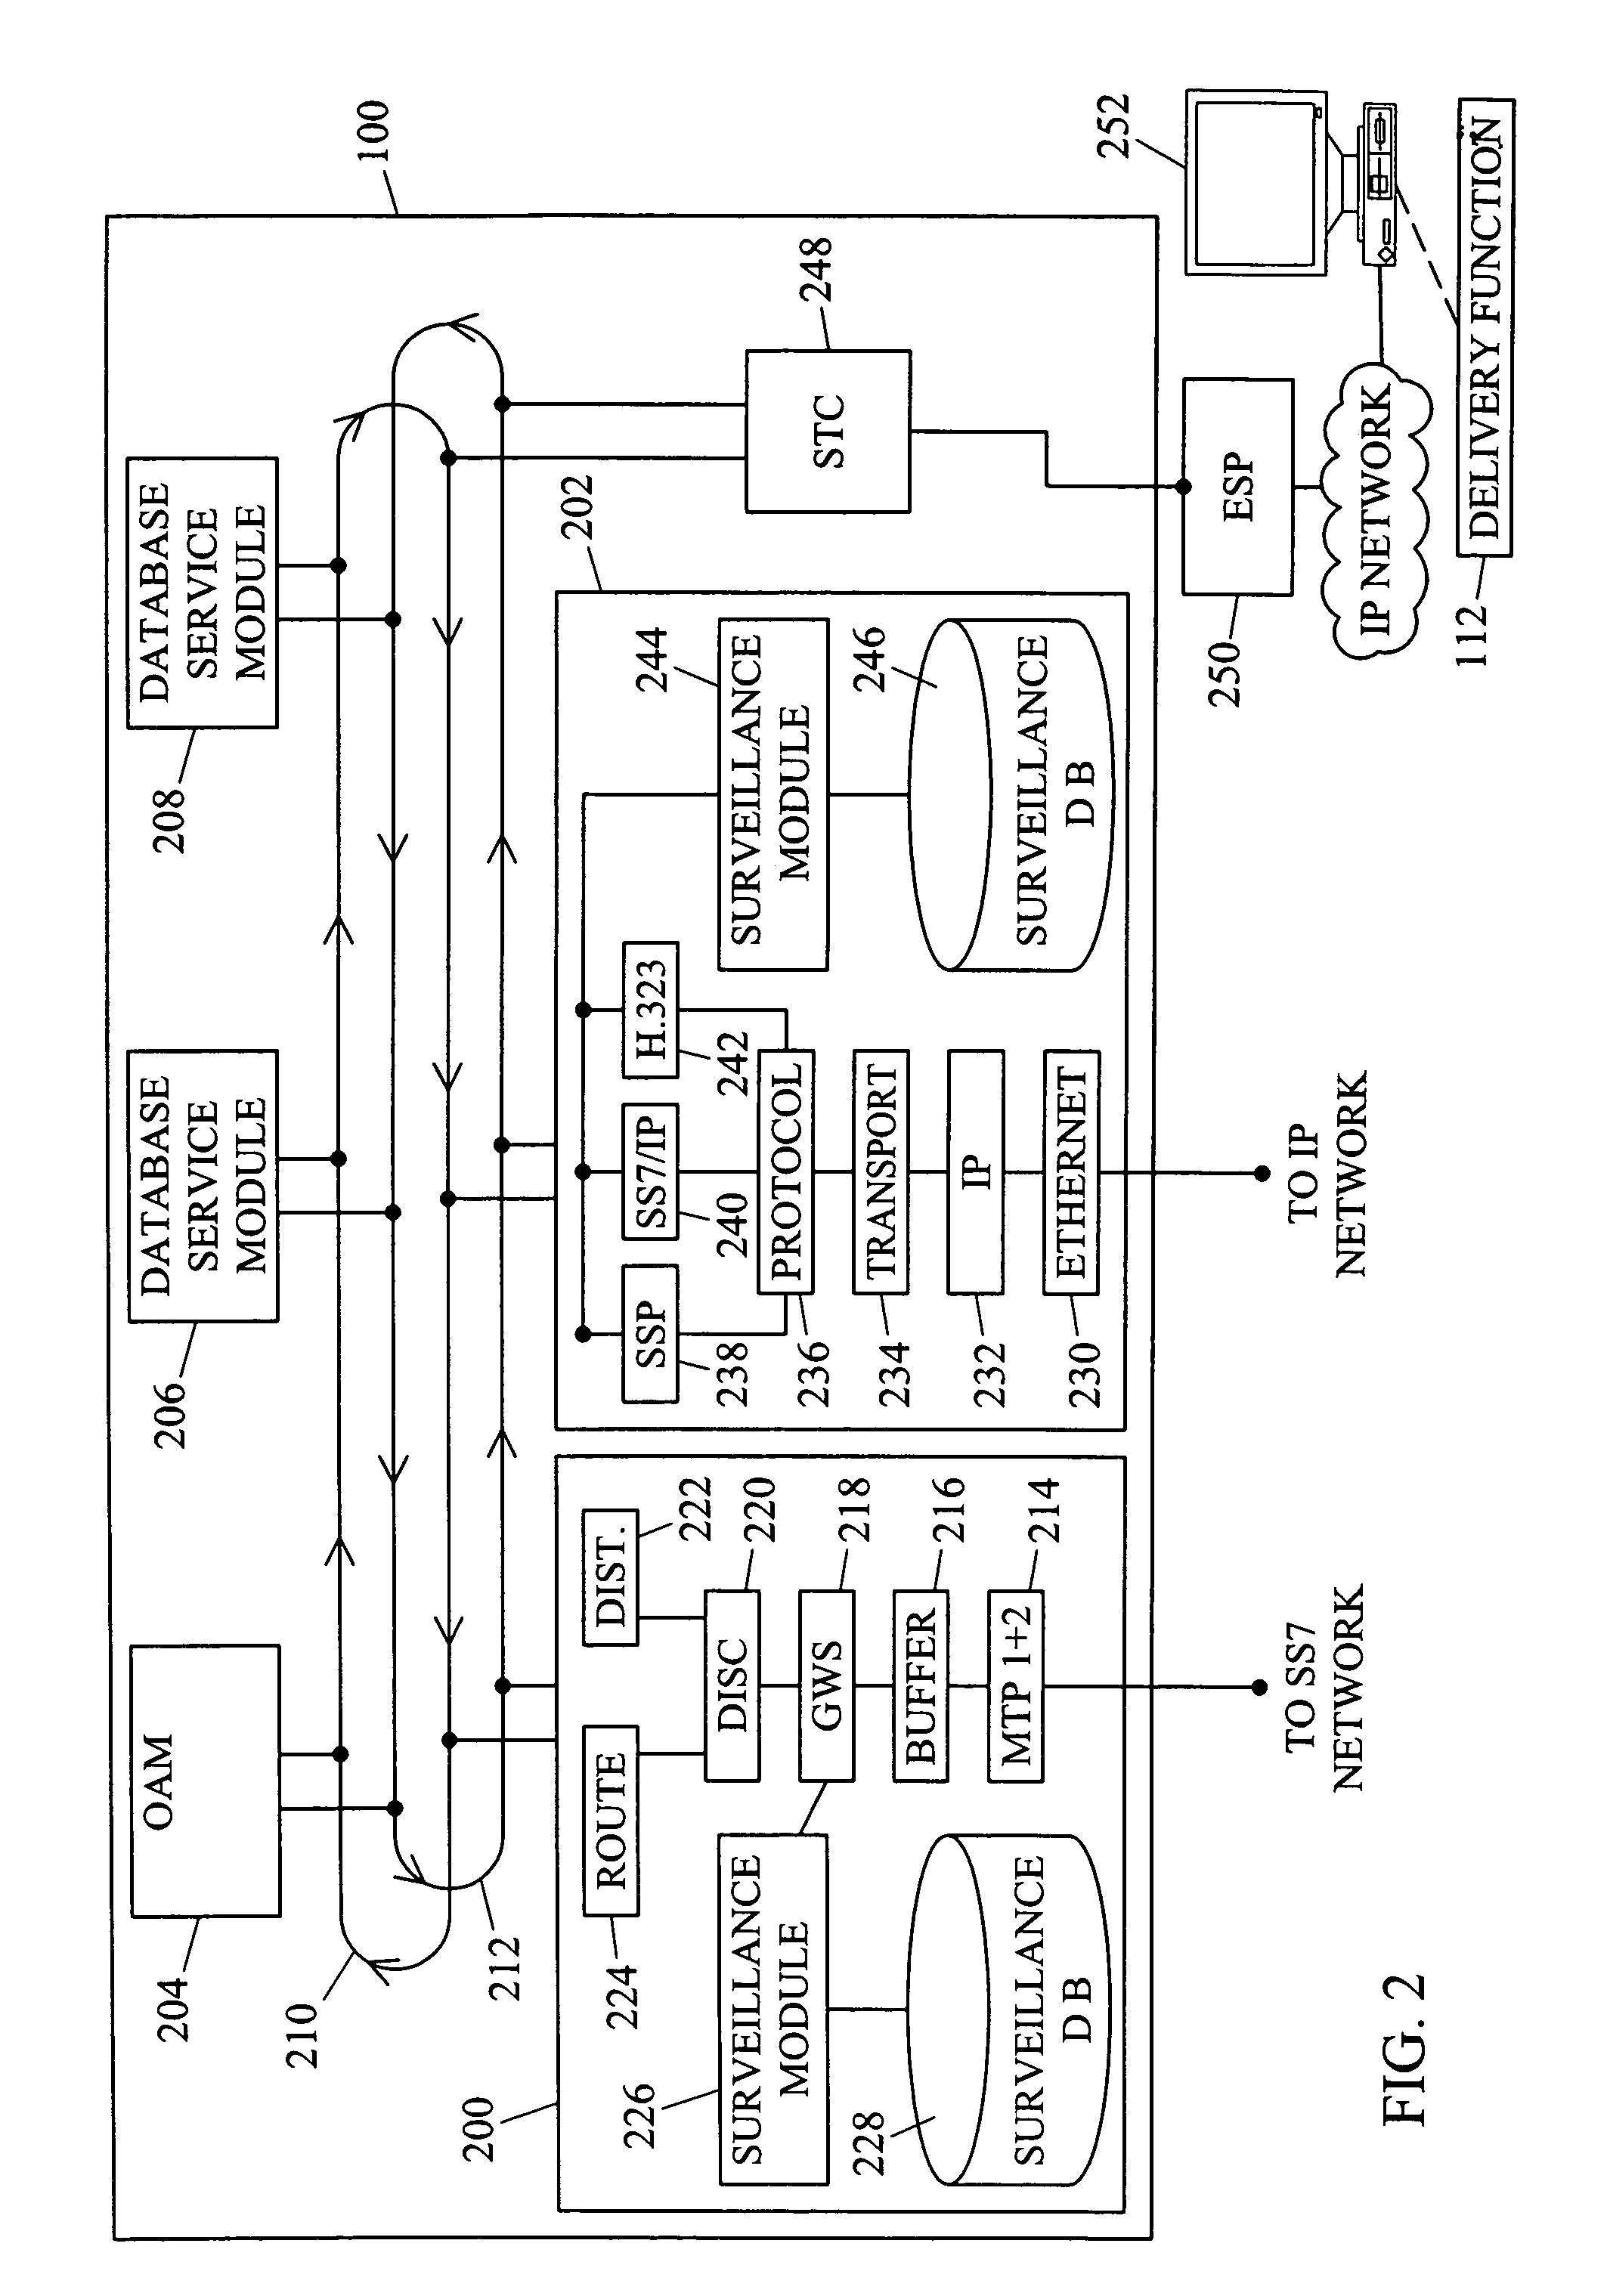 Method and systems for intelligent signaling router-based surveillance